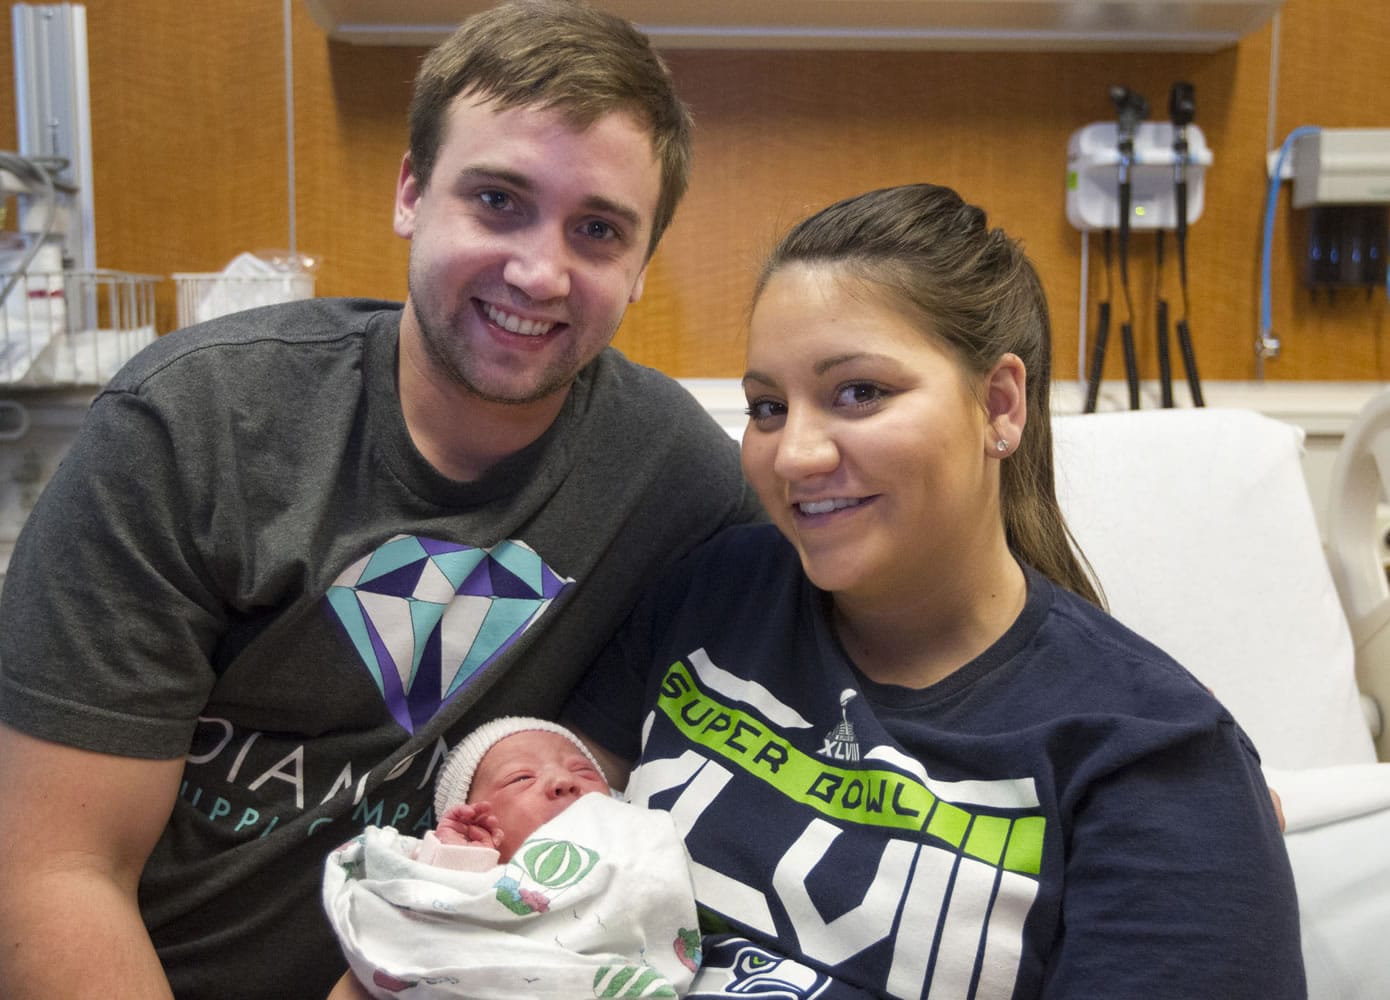 Aubrey Maya Schneider is the first baby born this year in Clark County. She was born at Legacy Salmon Creek Medical Center at 1:43 a.m.